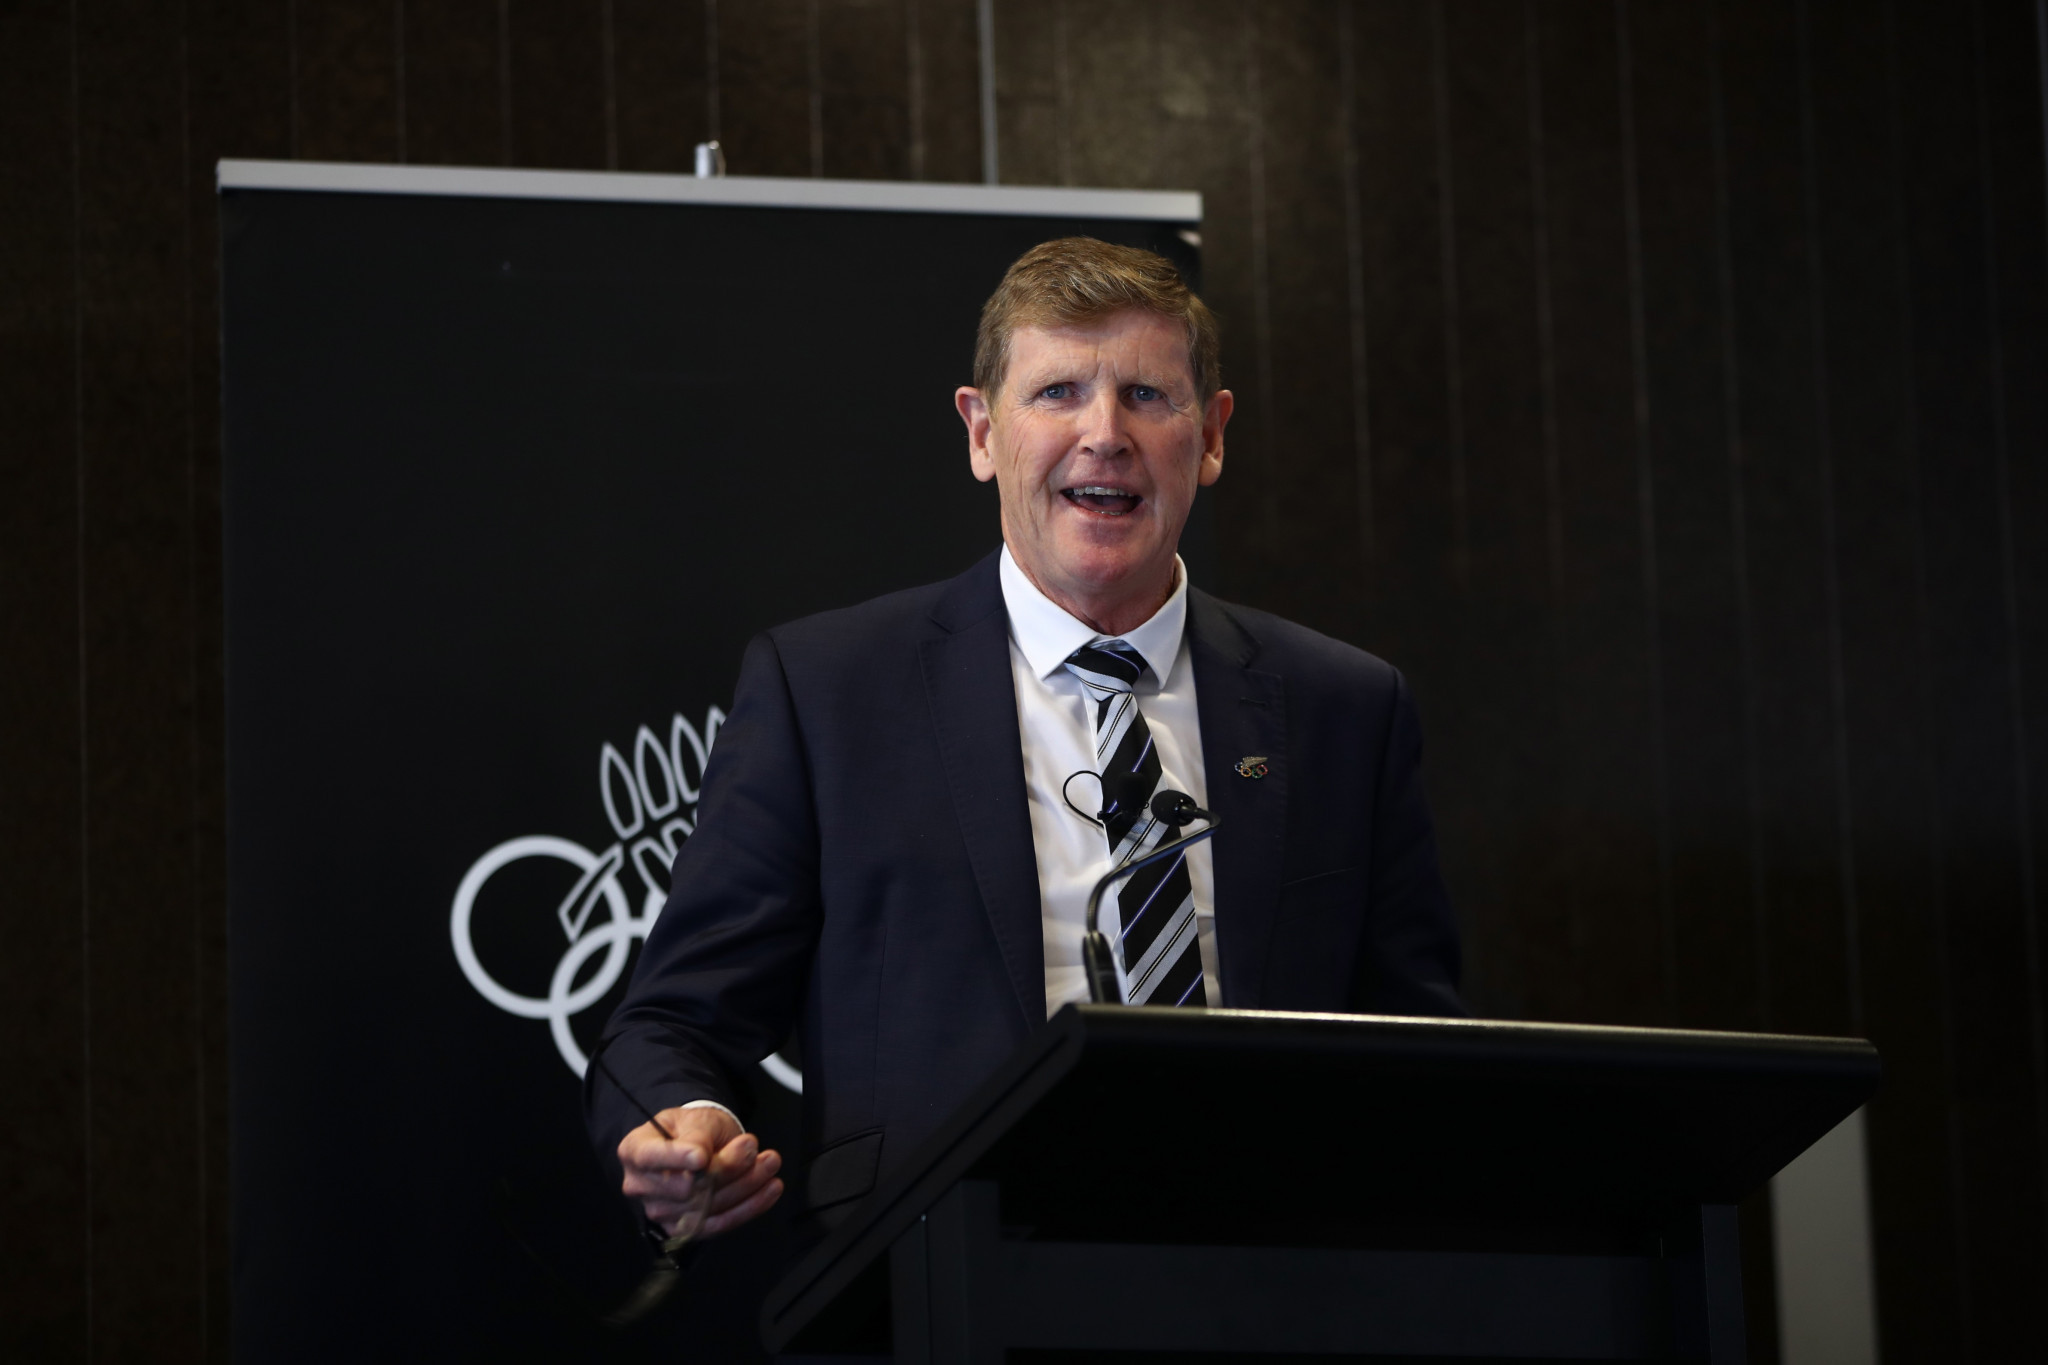 Mike Stanley was speaking during the presentation of the NZOC’s 2017 annual report at its General Assembly in Auckland today ©Getty Images